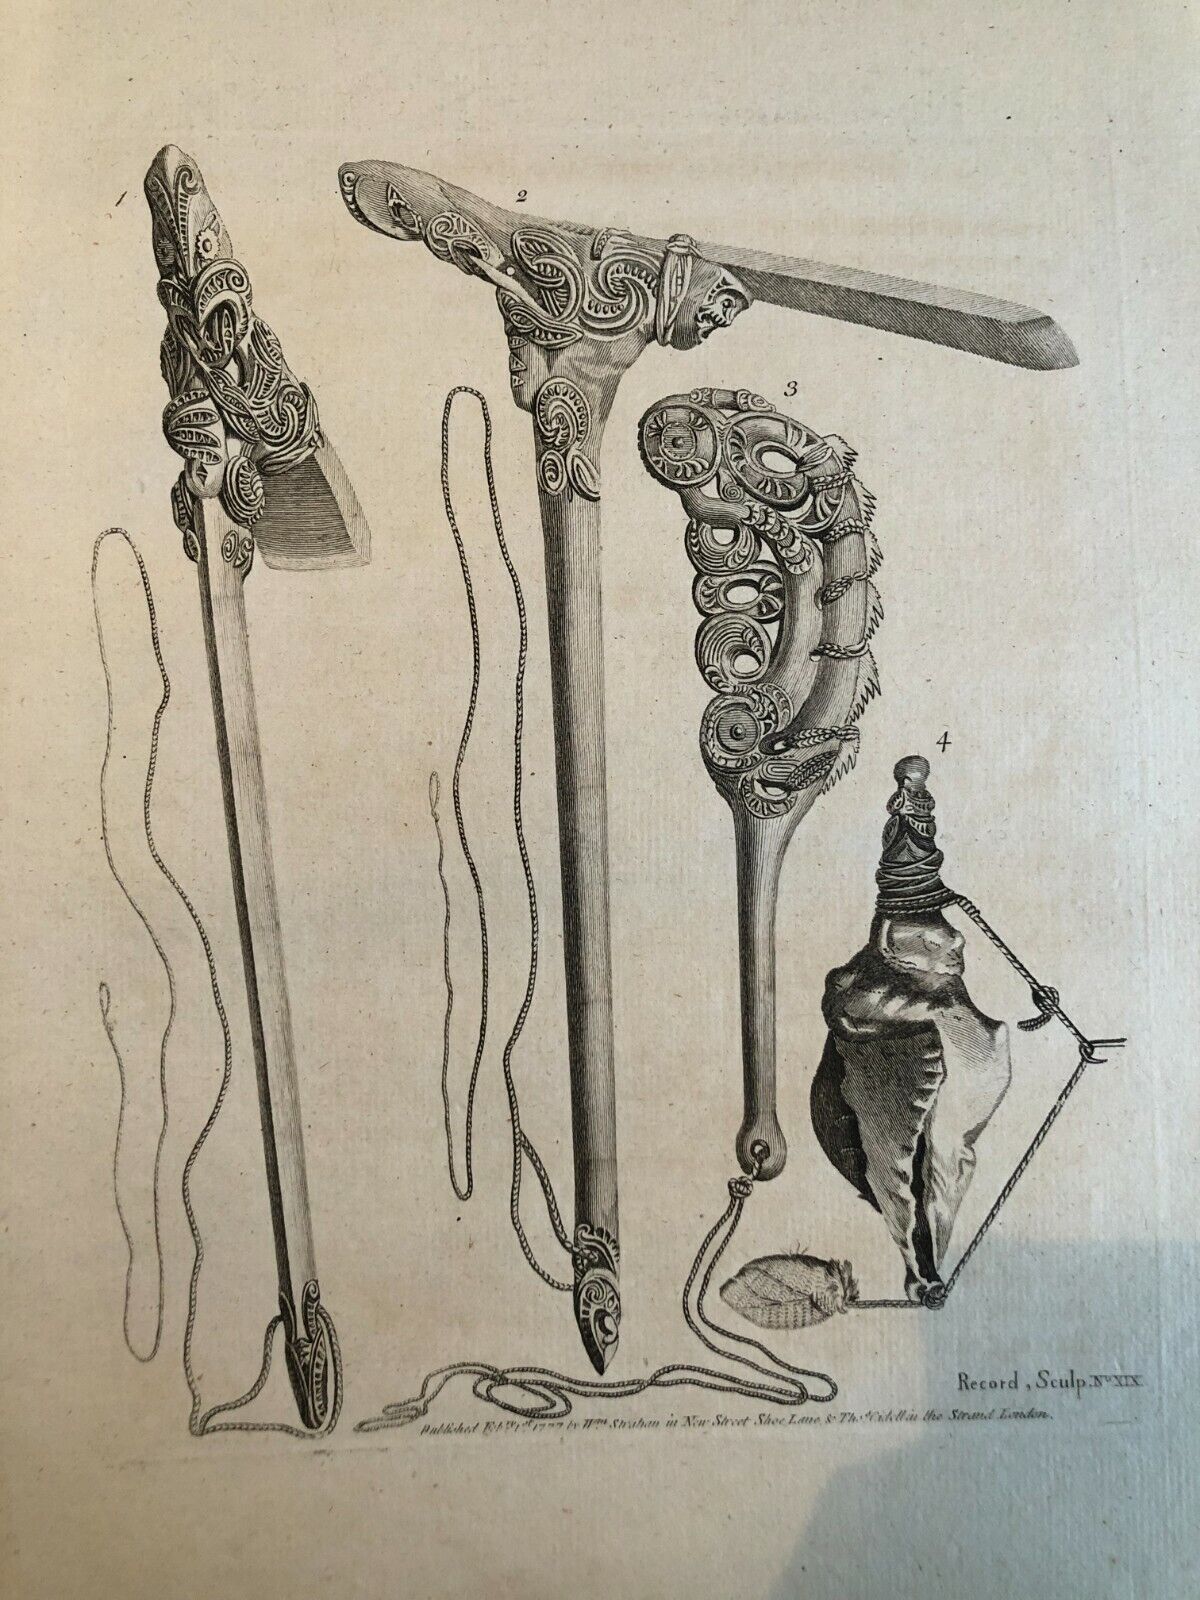 James Cook - "Weapons and objects of New Zealand" - 1777